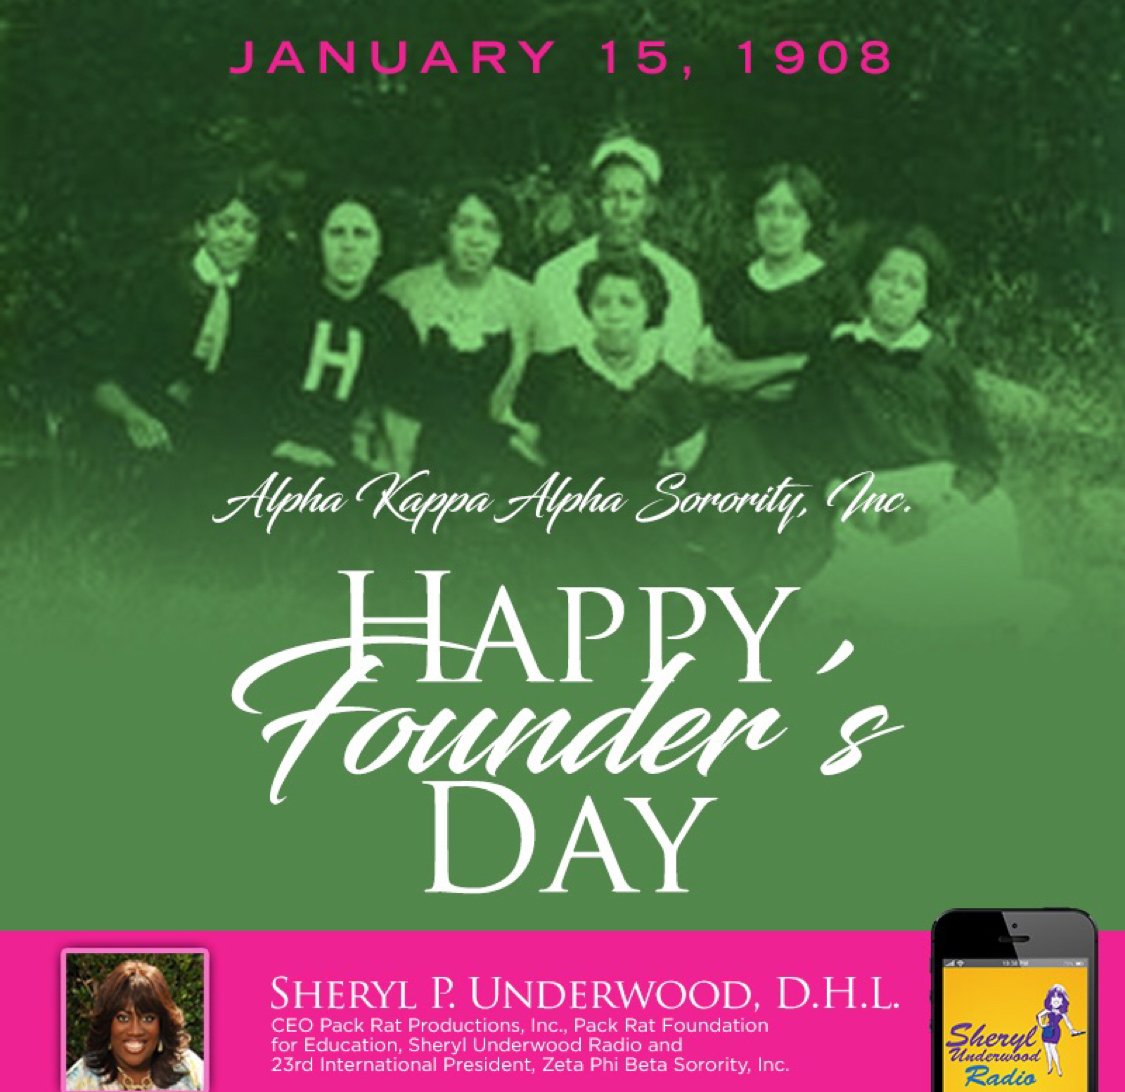 Underwood on Twitter: "Happy Day To Alpha Kappa Alpha Sorority, Incorporated...tag your favorite ...call 1-855-Sheryl-1 to wish any AKA or AKA Chapter Happy Founders' Day from @sherylunderwoodradio @underwoodradio @sherylunderwood